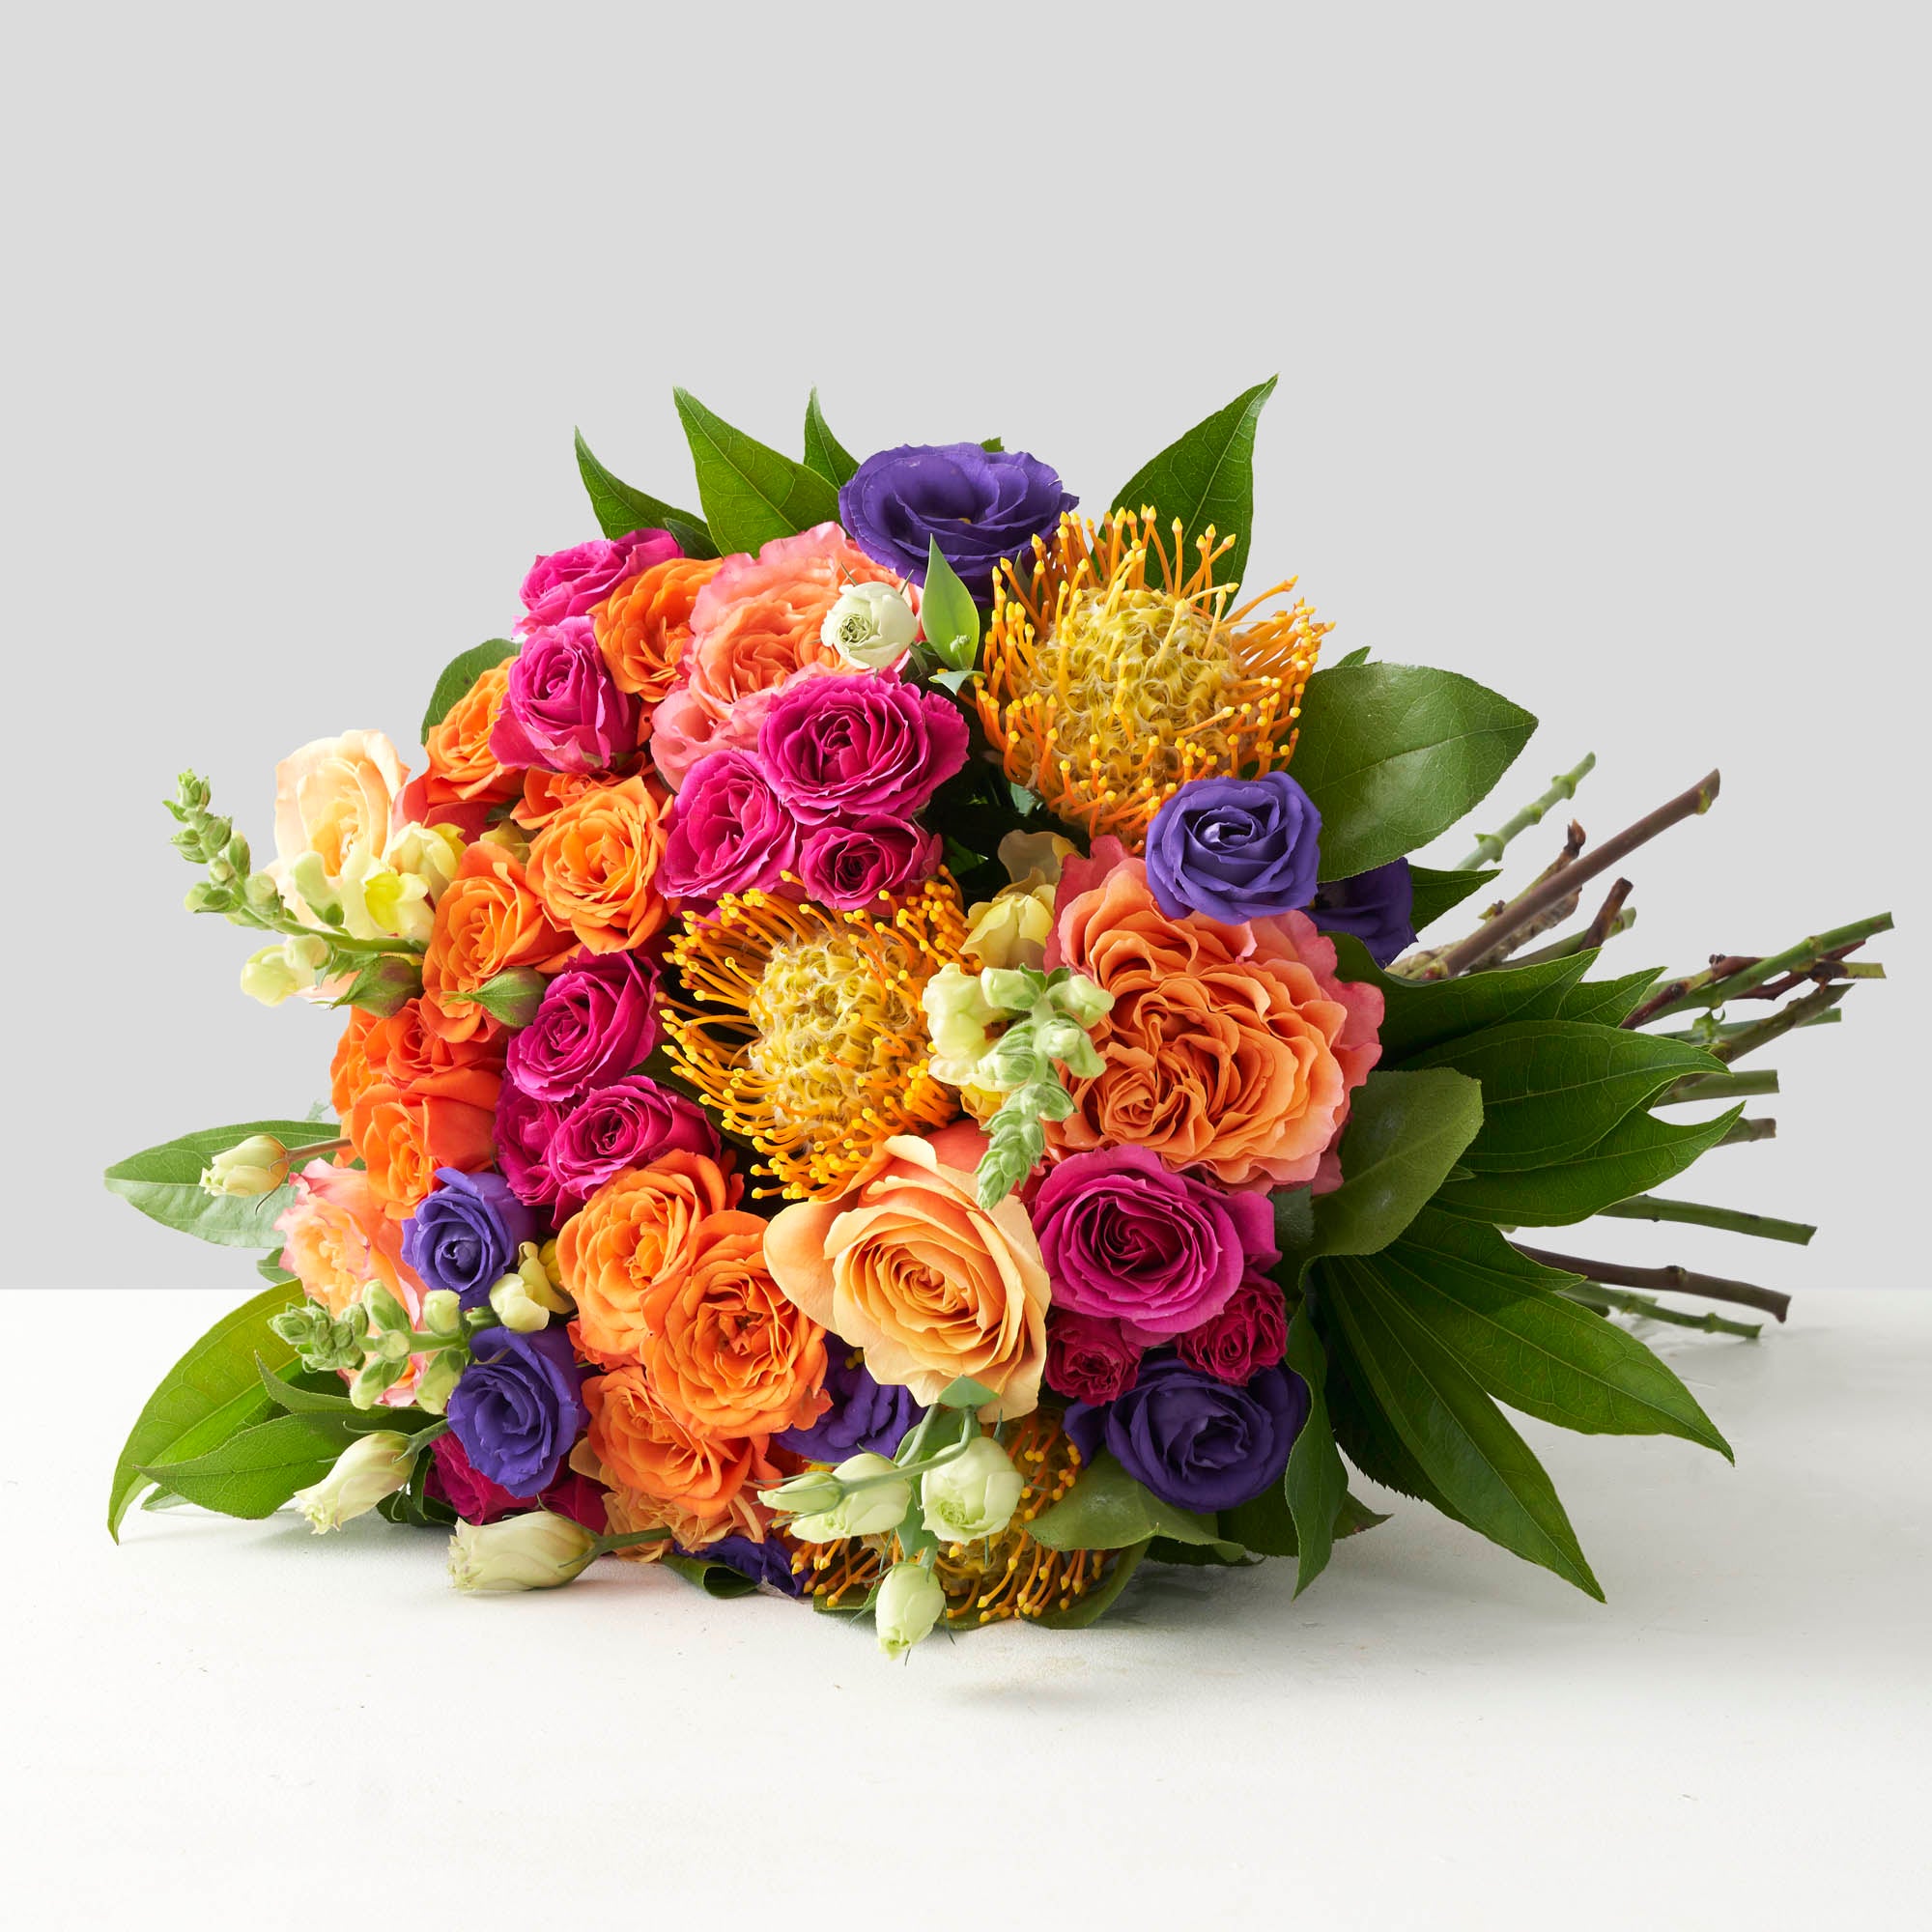 Round handtied bouquet with orange free spirit roses, dark purple lisianthus, hot pink spray roses, and gold protea.